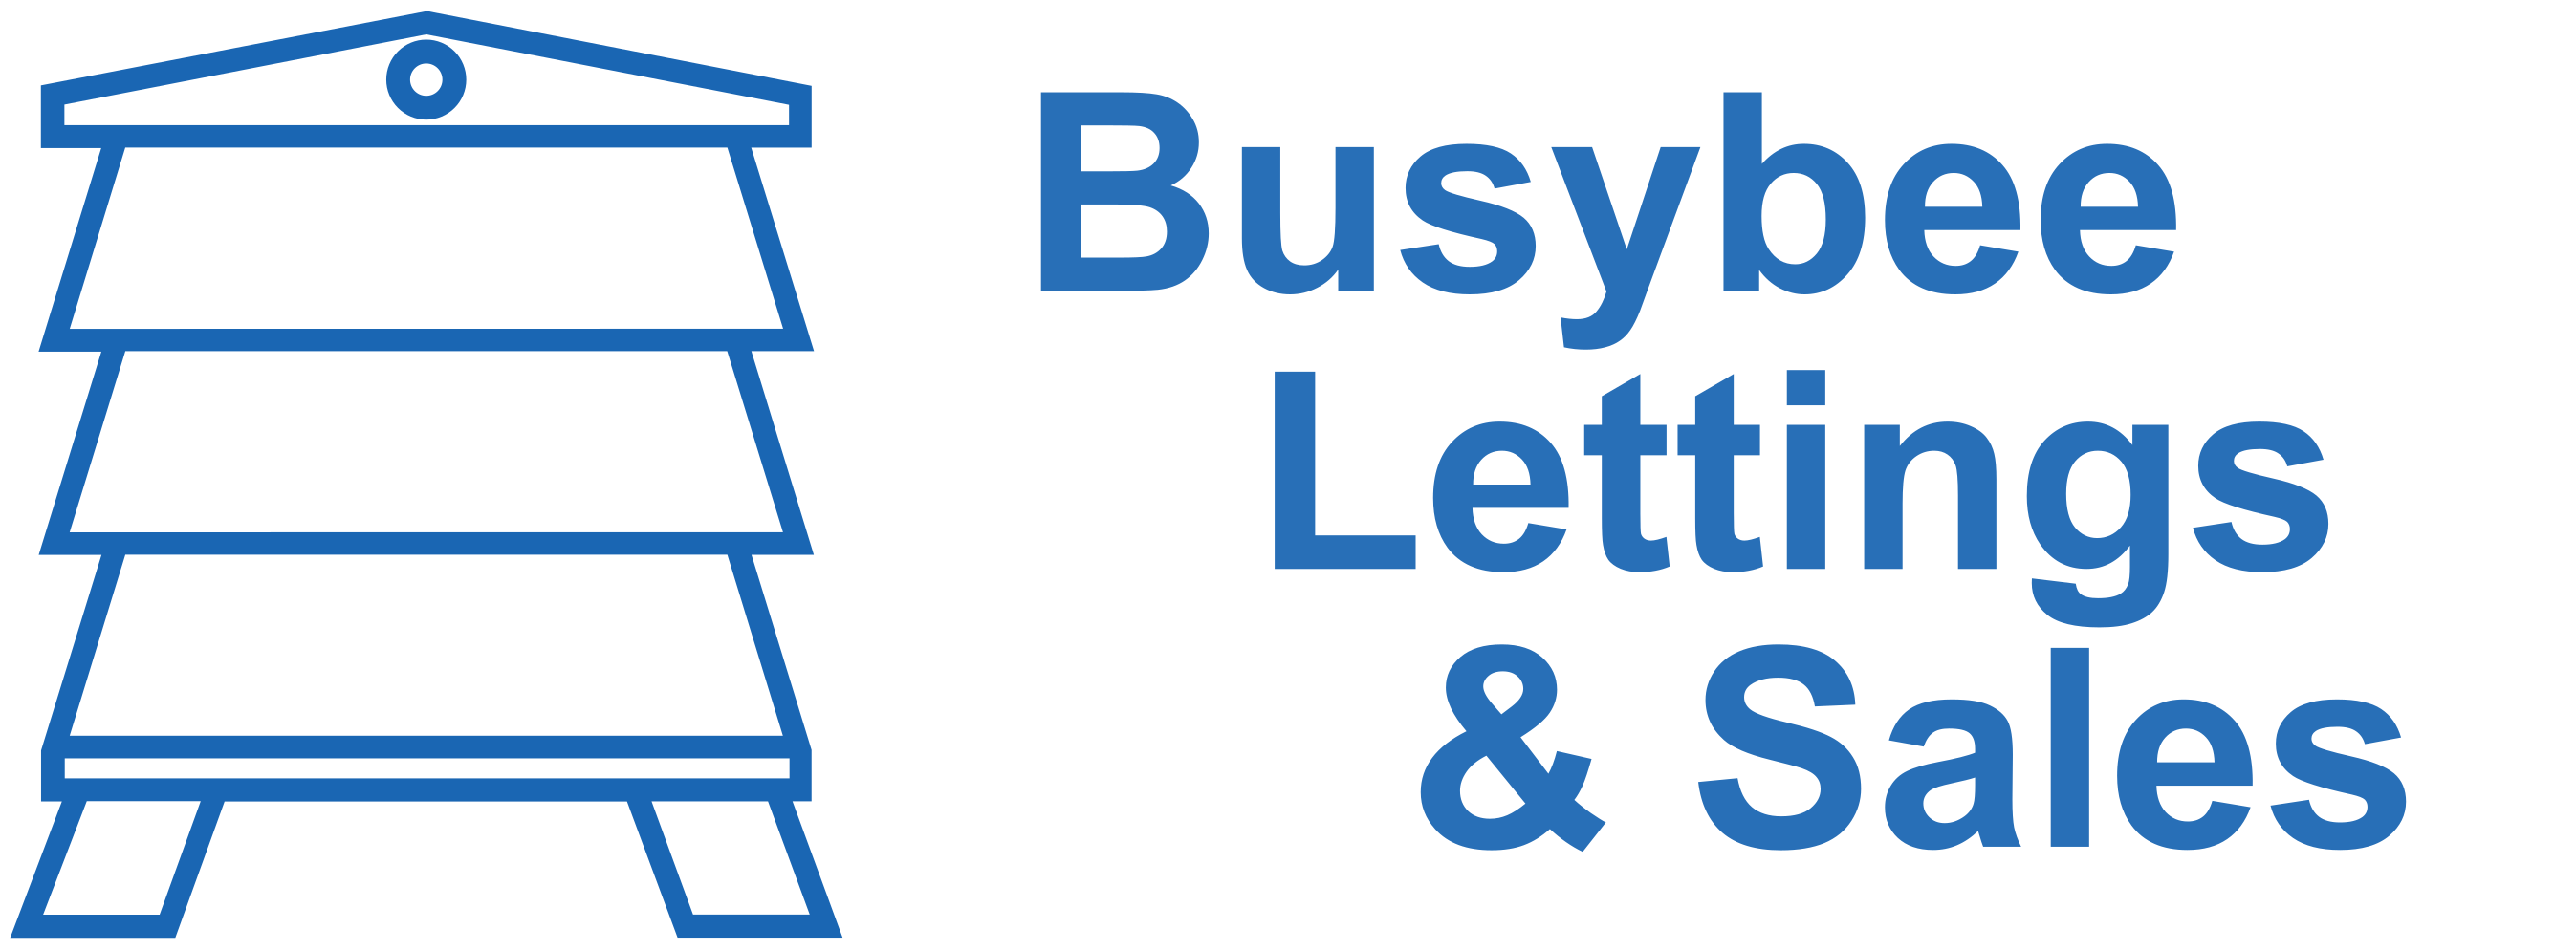 Busybee Lettings & Sales - Street : Letting agents in Glastonbury Somerset